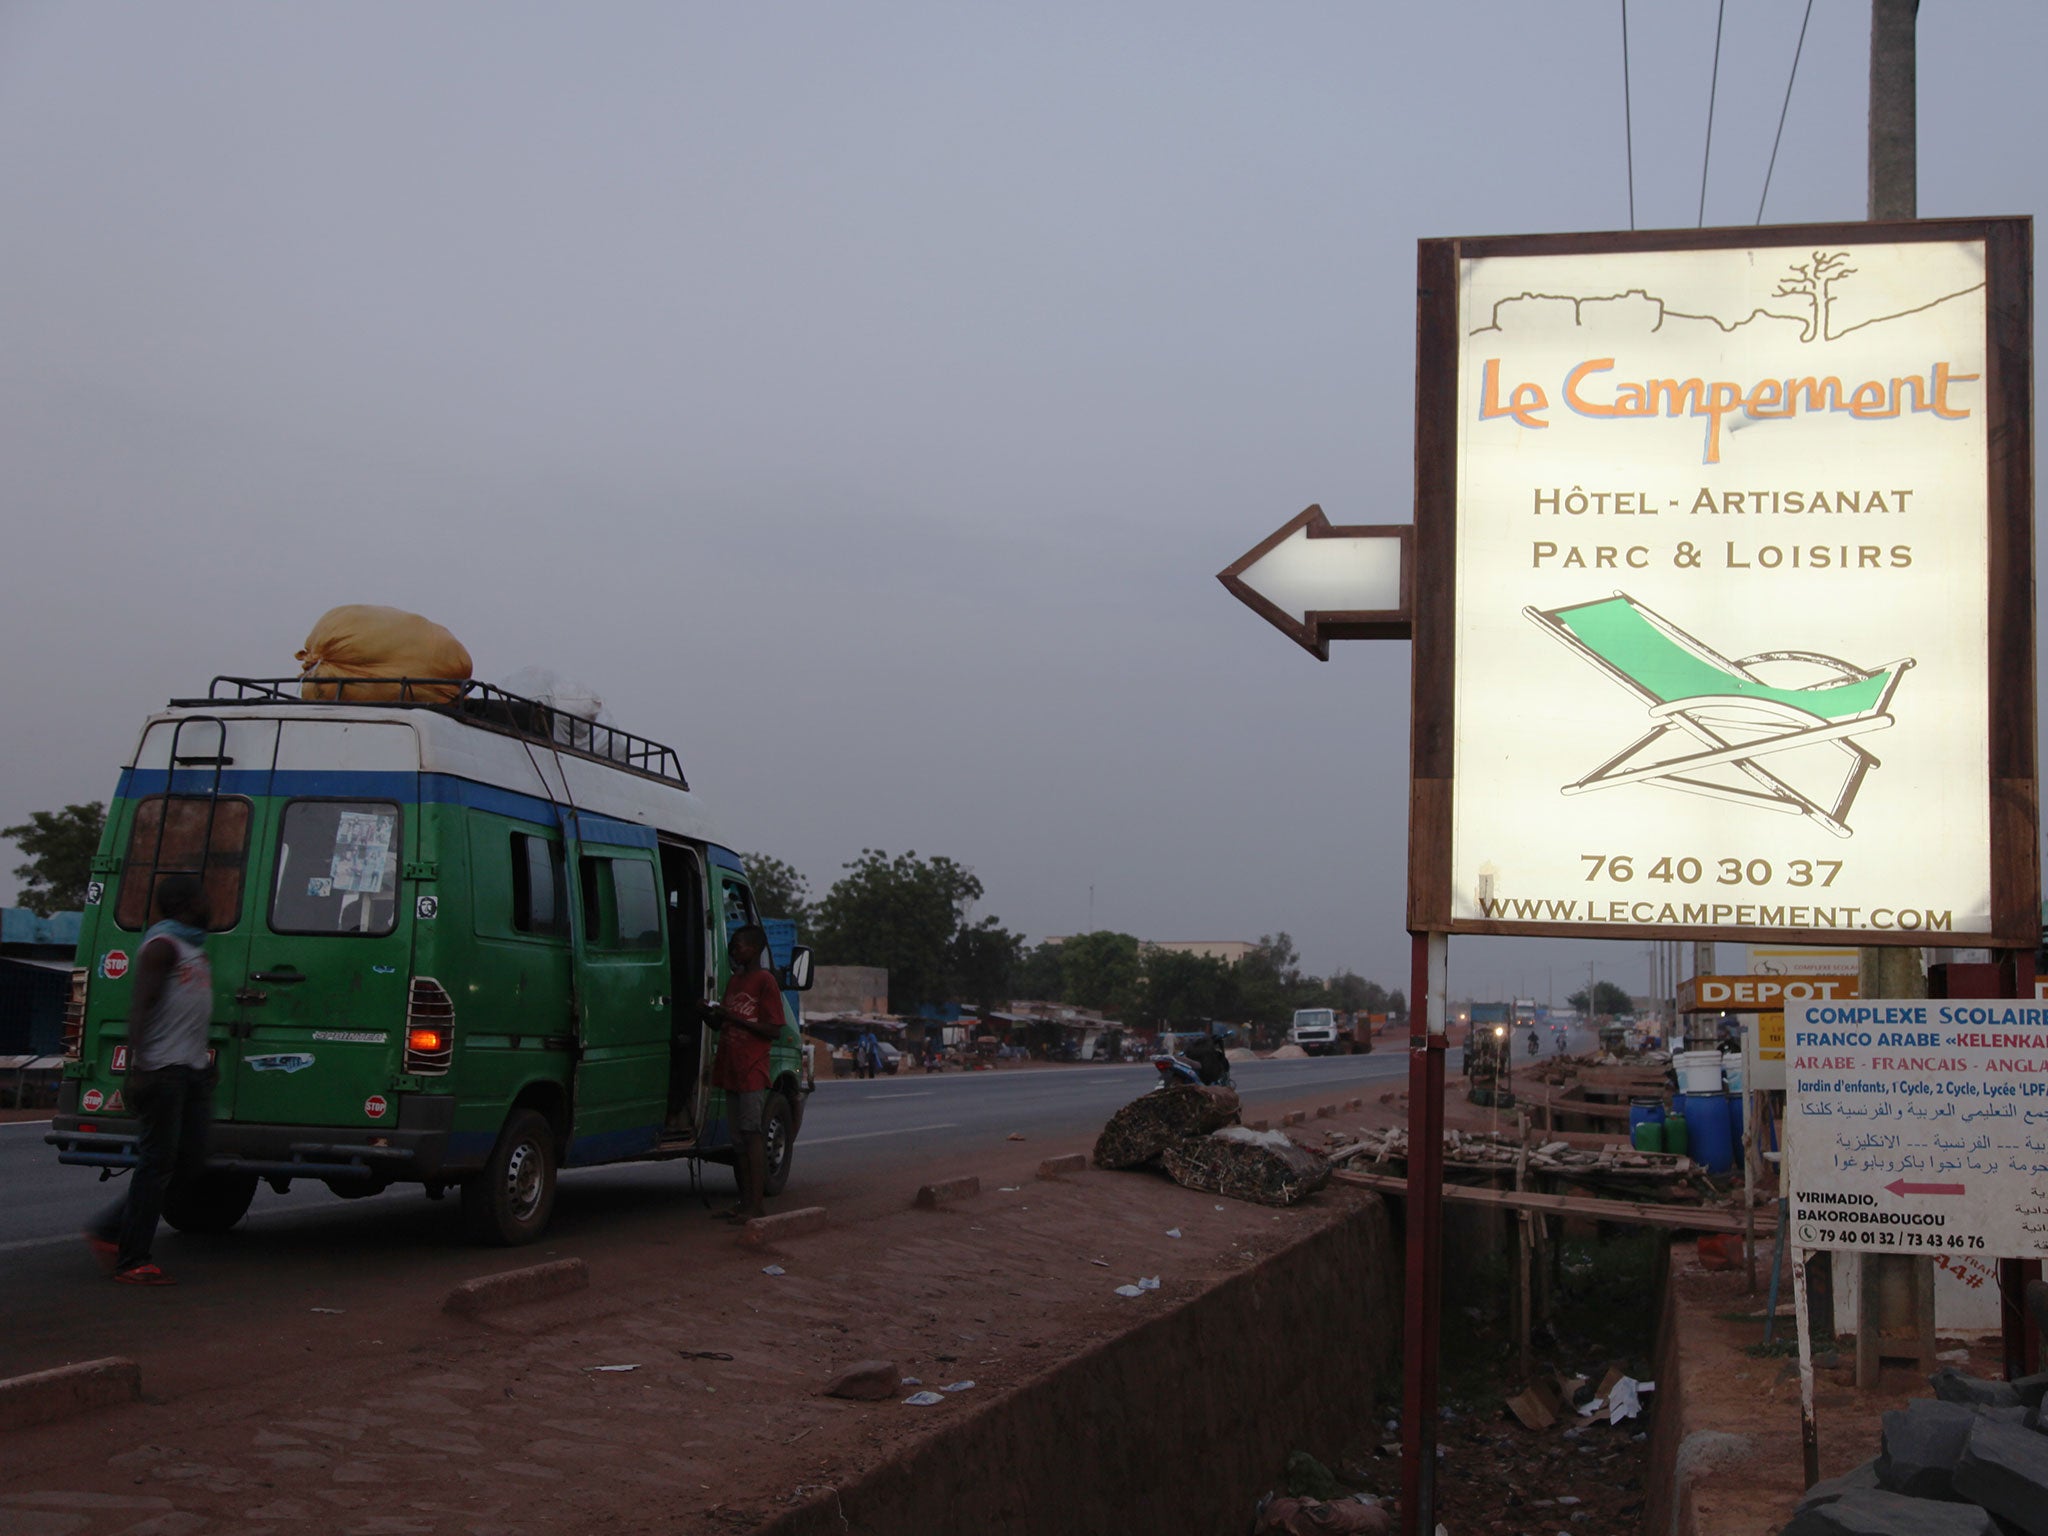 A sign points to Le Campement, a resort near Bamako, Mali, that was attacked on 18 June